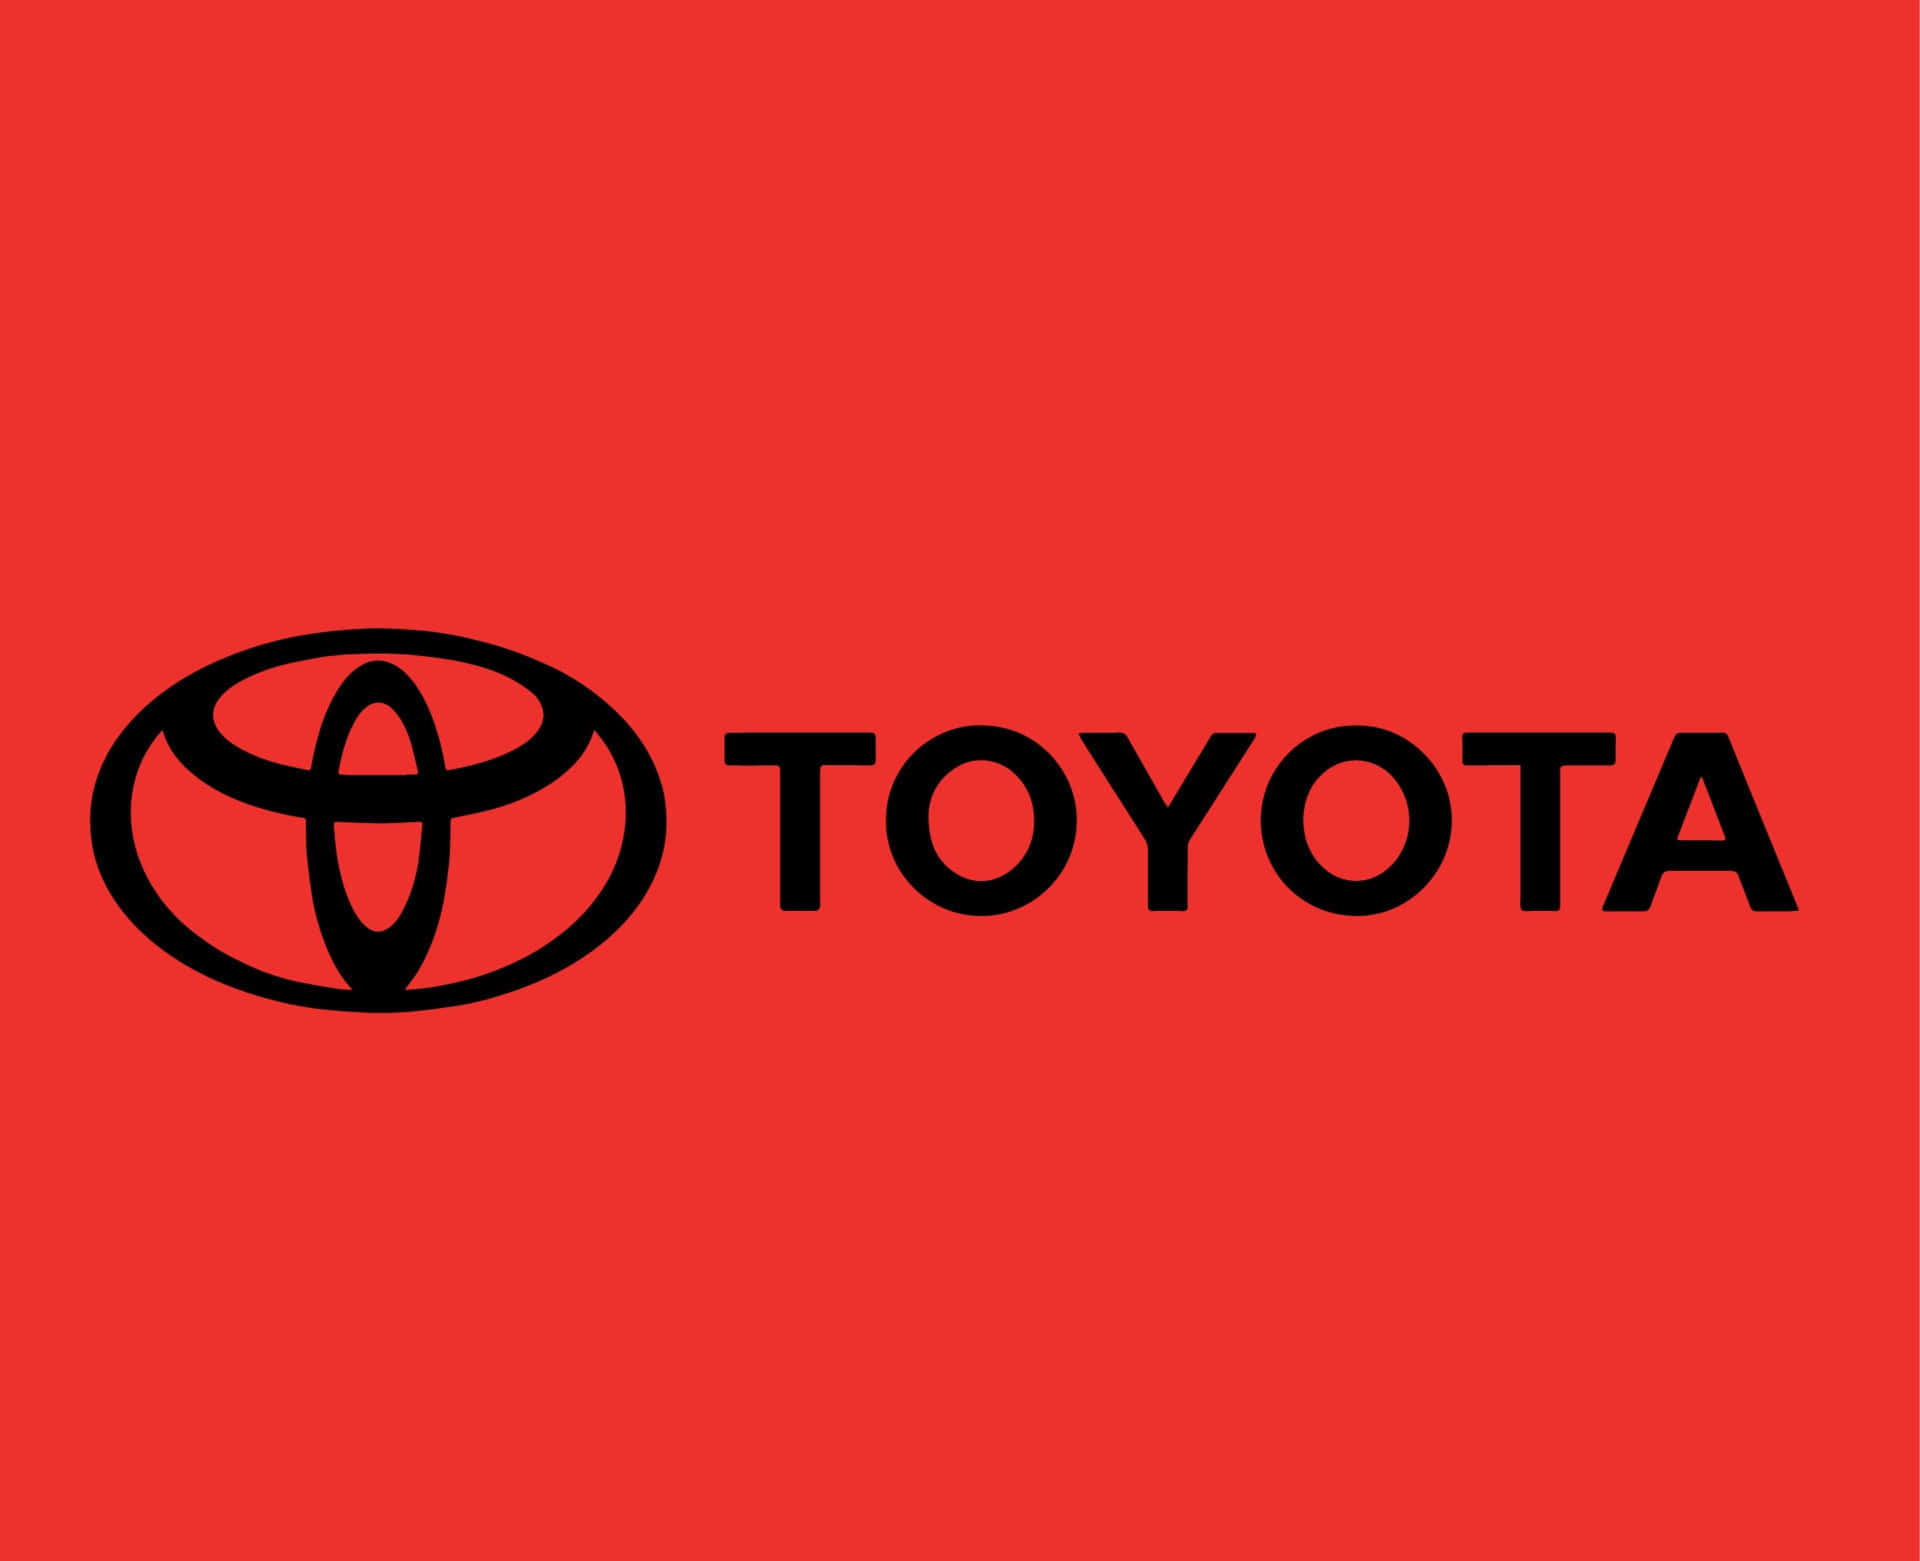 Toyota Logo On A Red Background